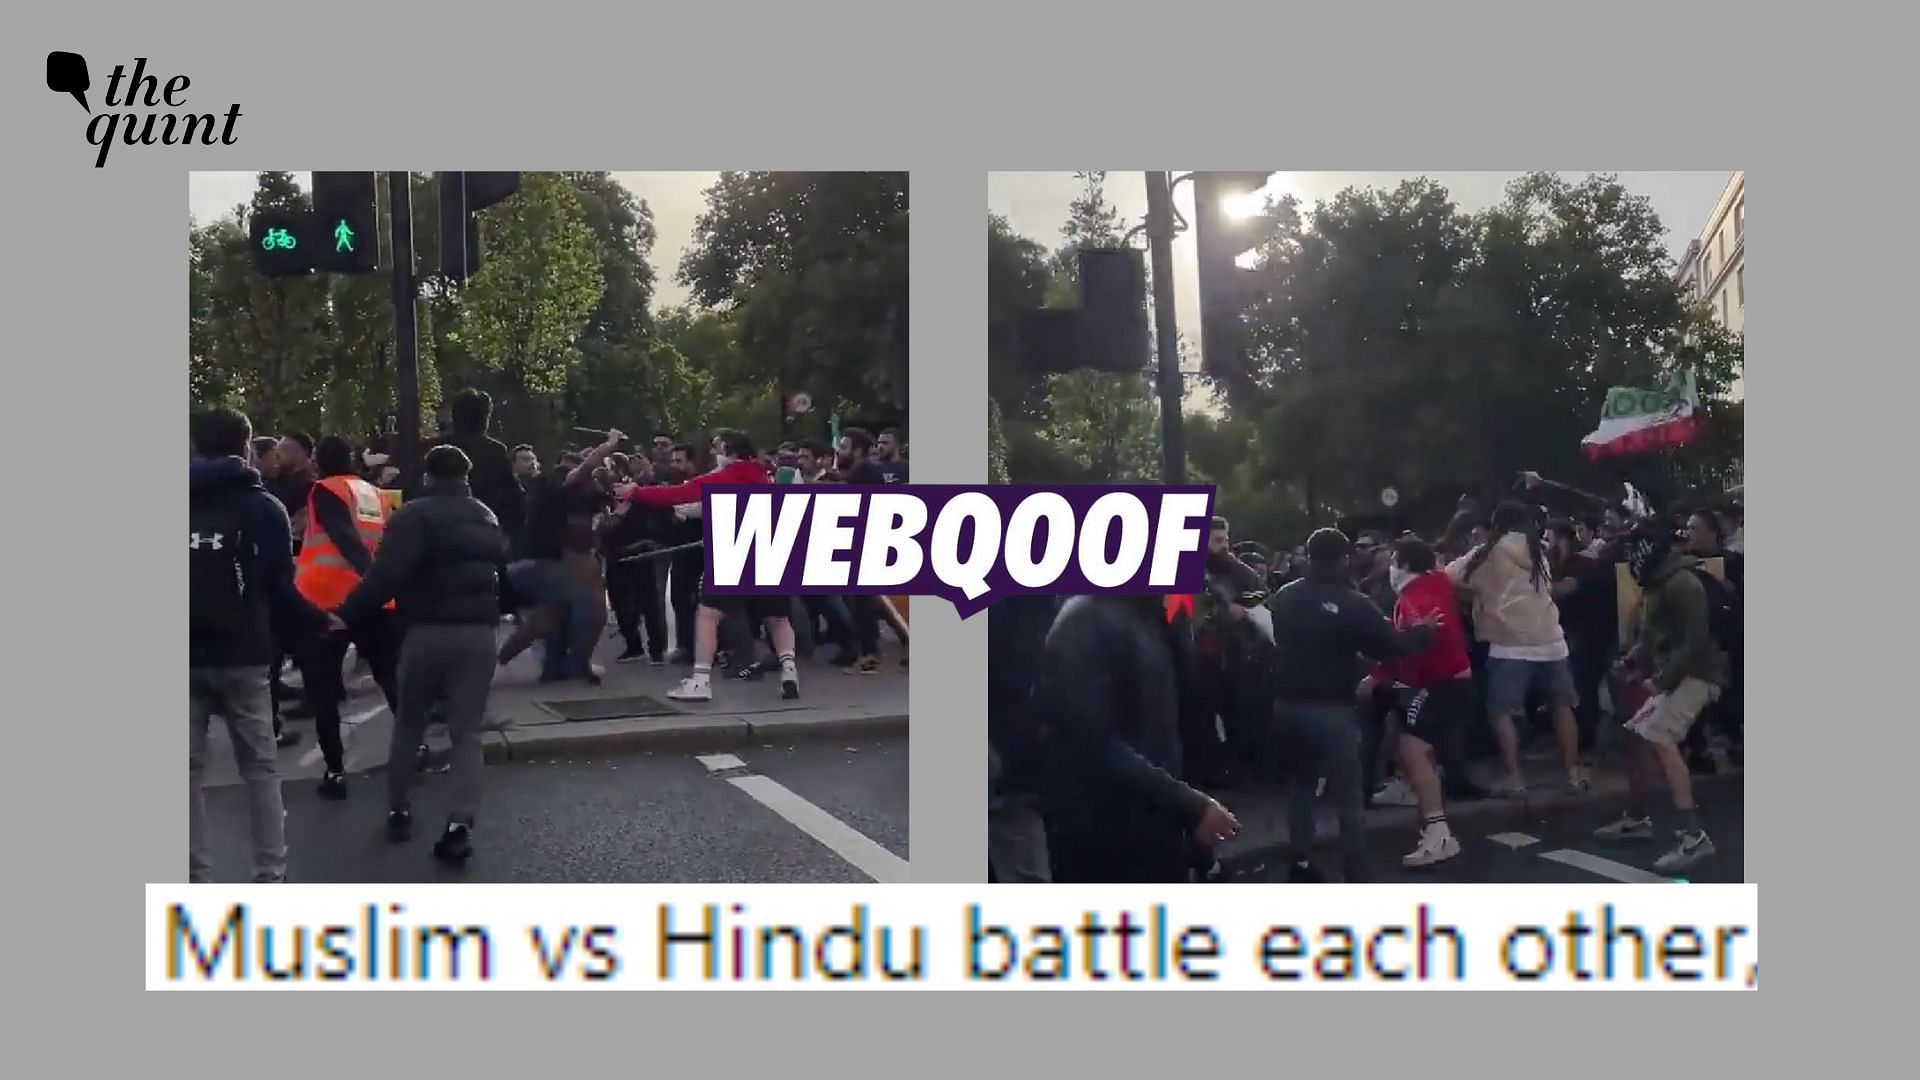 <div class="paragraphs"><p>The claim suggests that the video shows people from Hindu and Muslim communities fighting with each other.</p></div>